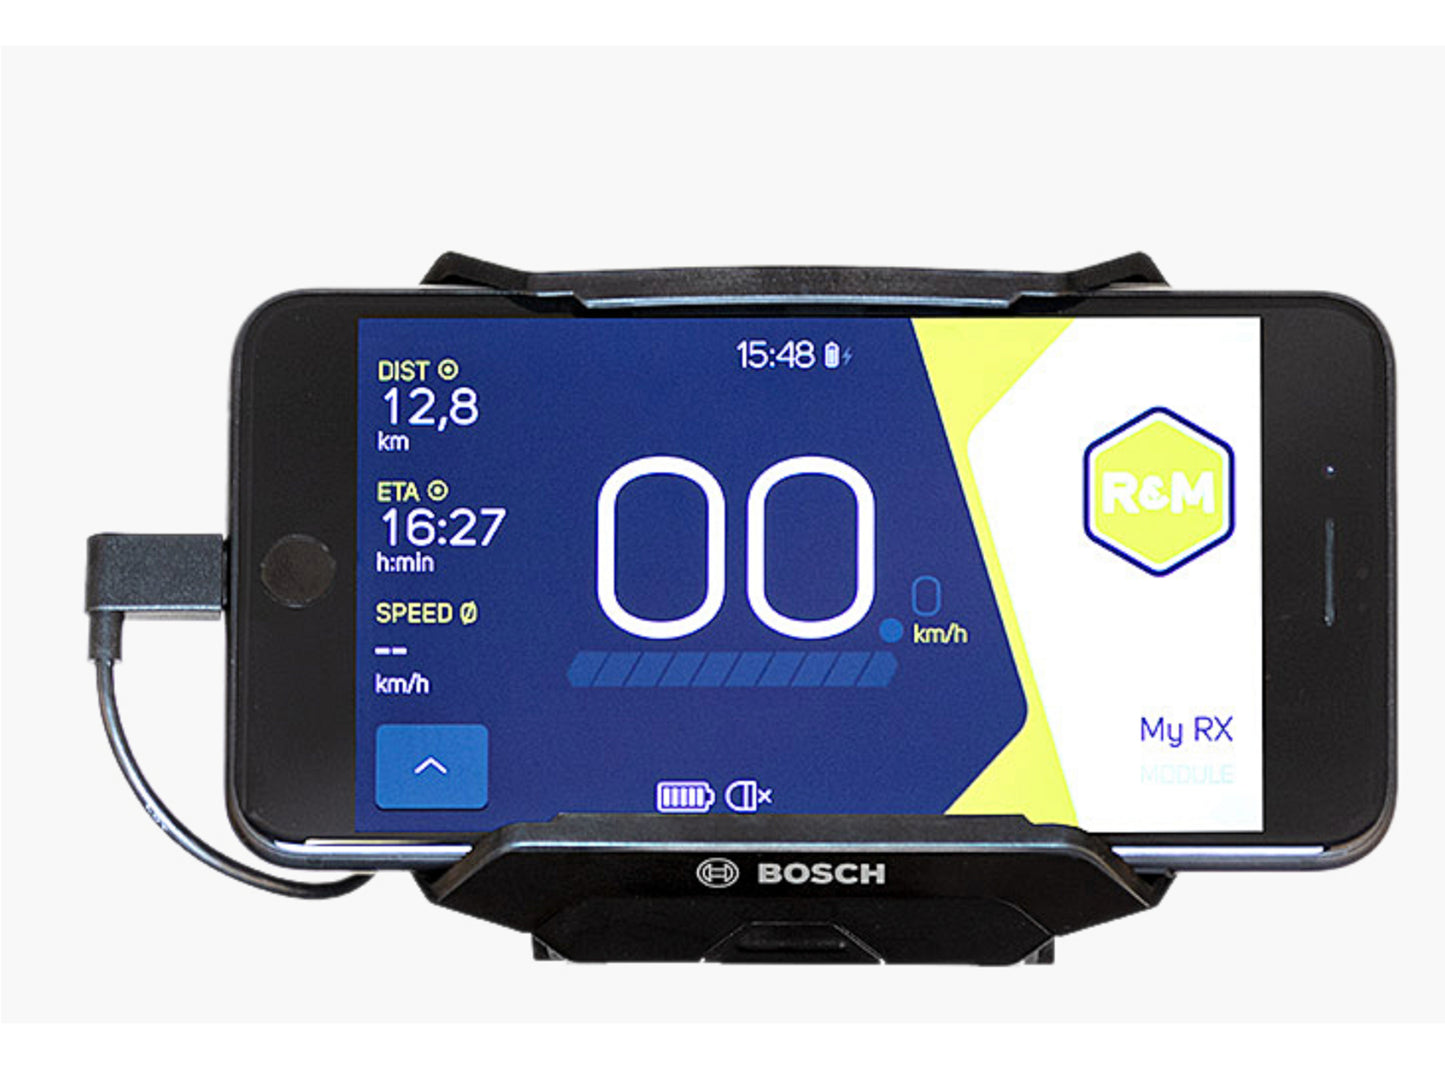 Riese & Muller Packster 70 Vario cargo eMTB hardtail close up bosch smartphone display option